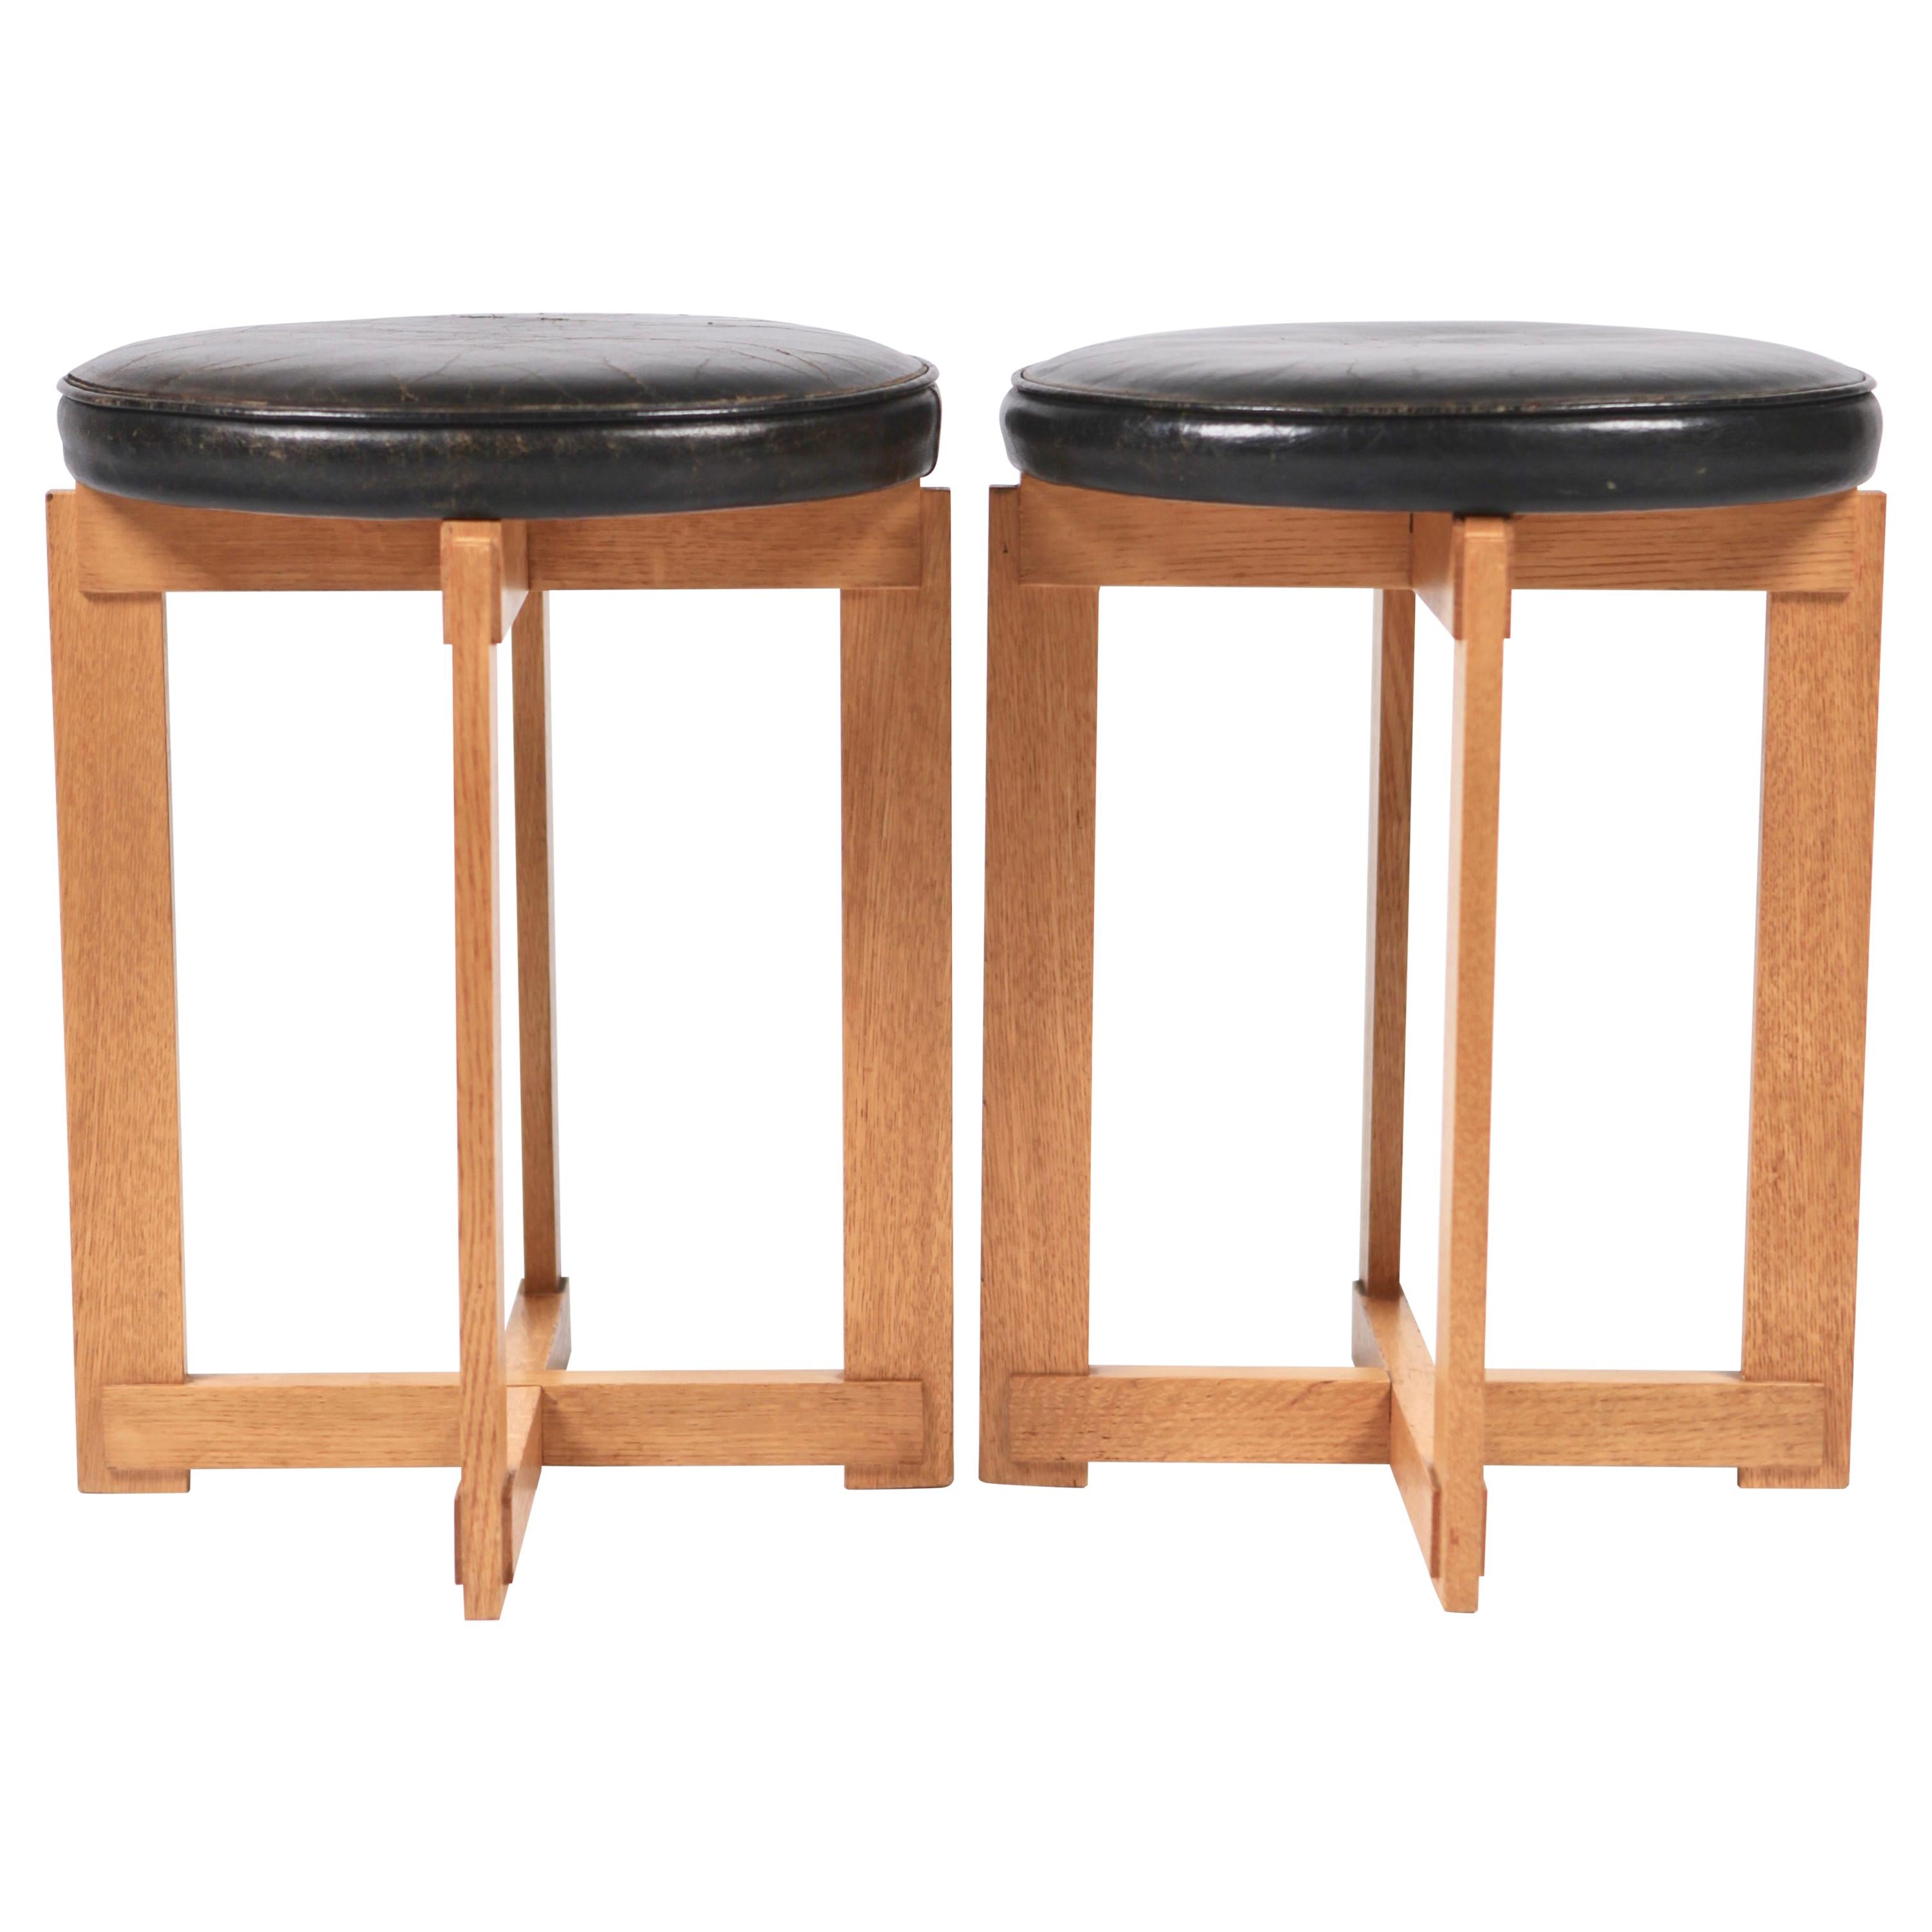 Uno & Östen Kristiansson, Rare Stools in Oak and Leather for Luxus, Sweden 1960s